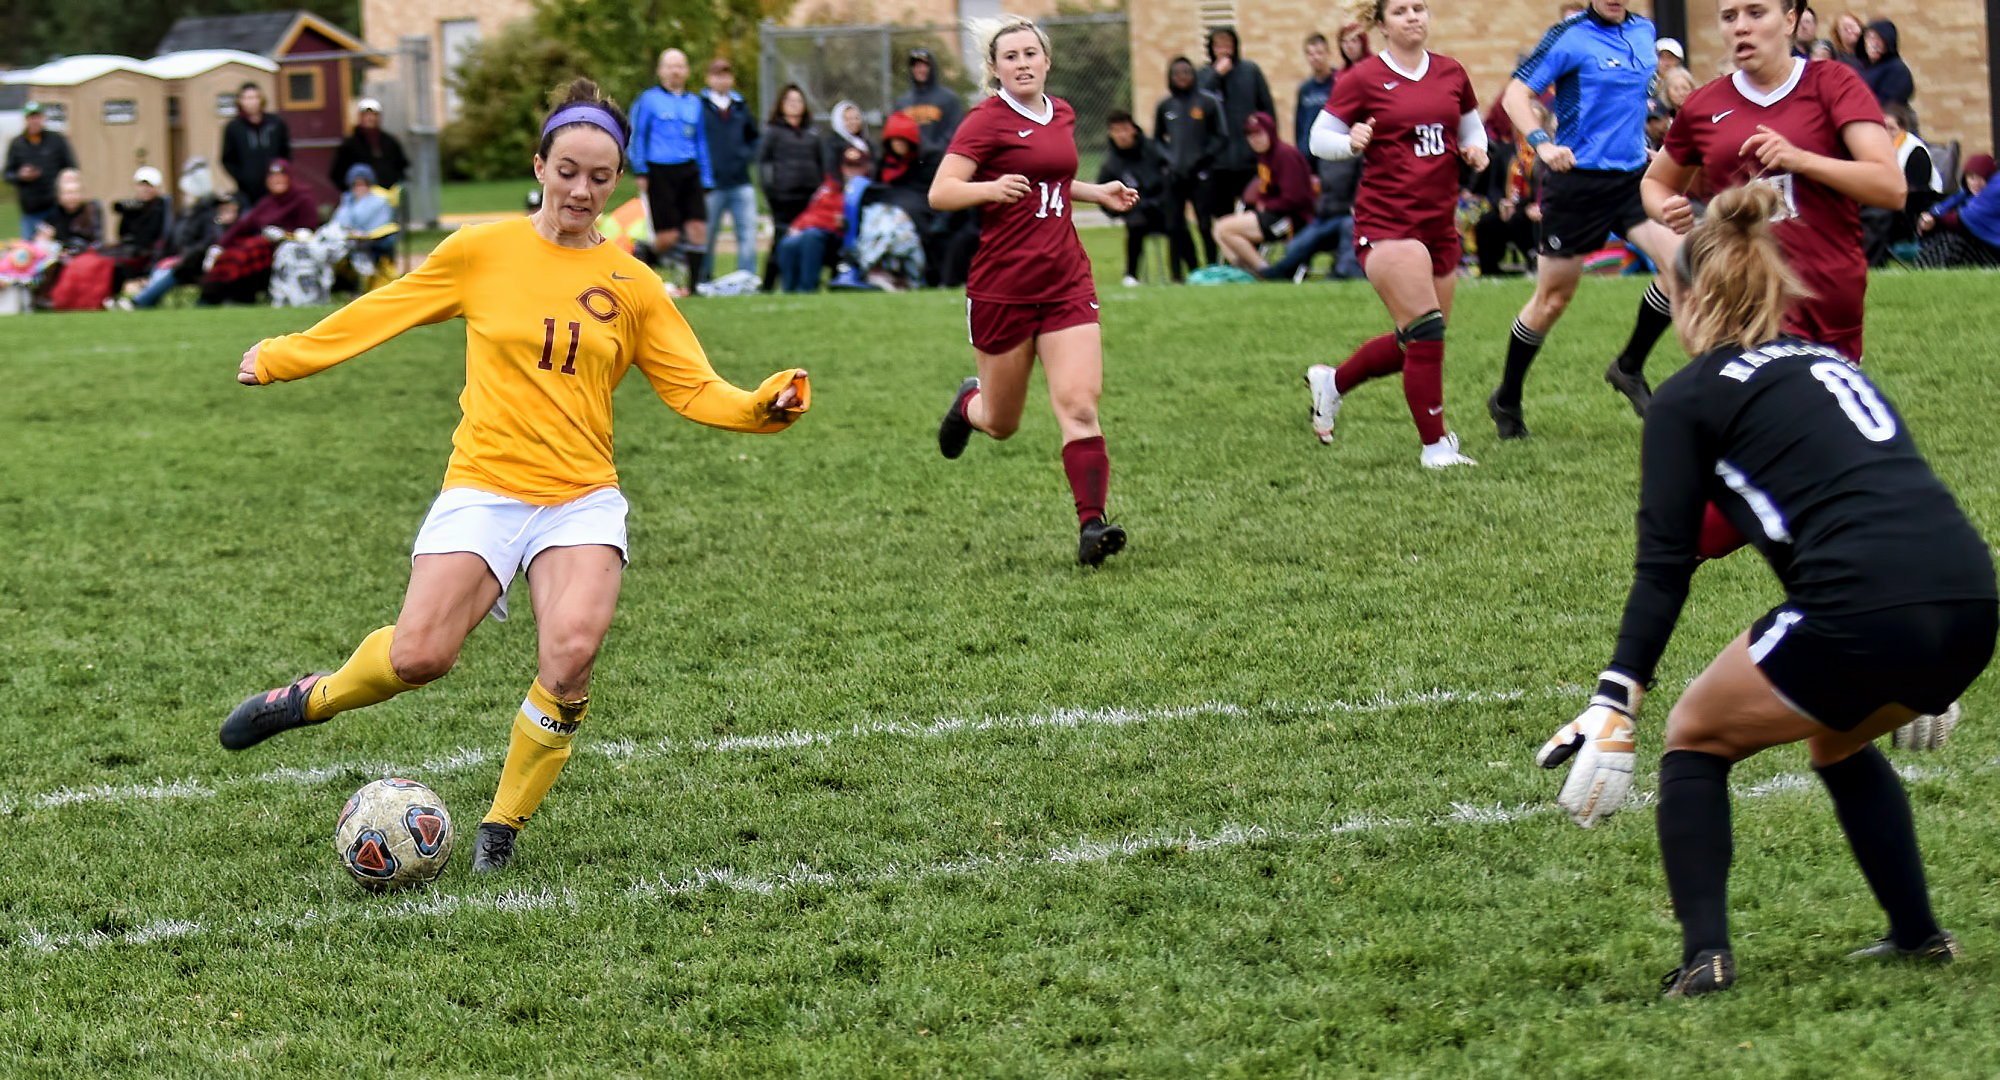 Senior Karsen Granning takes a shot on goal in the second half of the Cobbers' 2-1 win over Hamline. Garanning scored the game-winning goal in the final seven minutes of play.